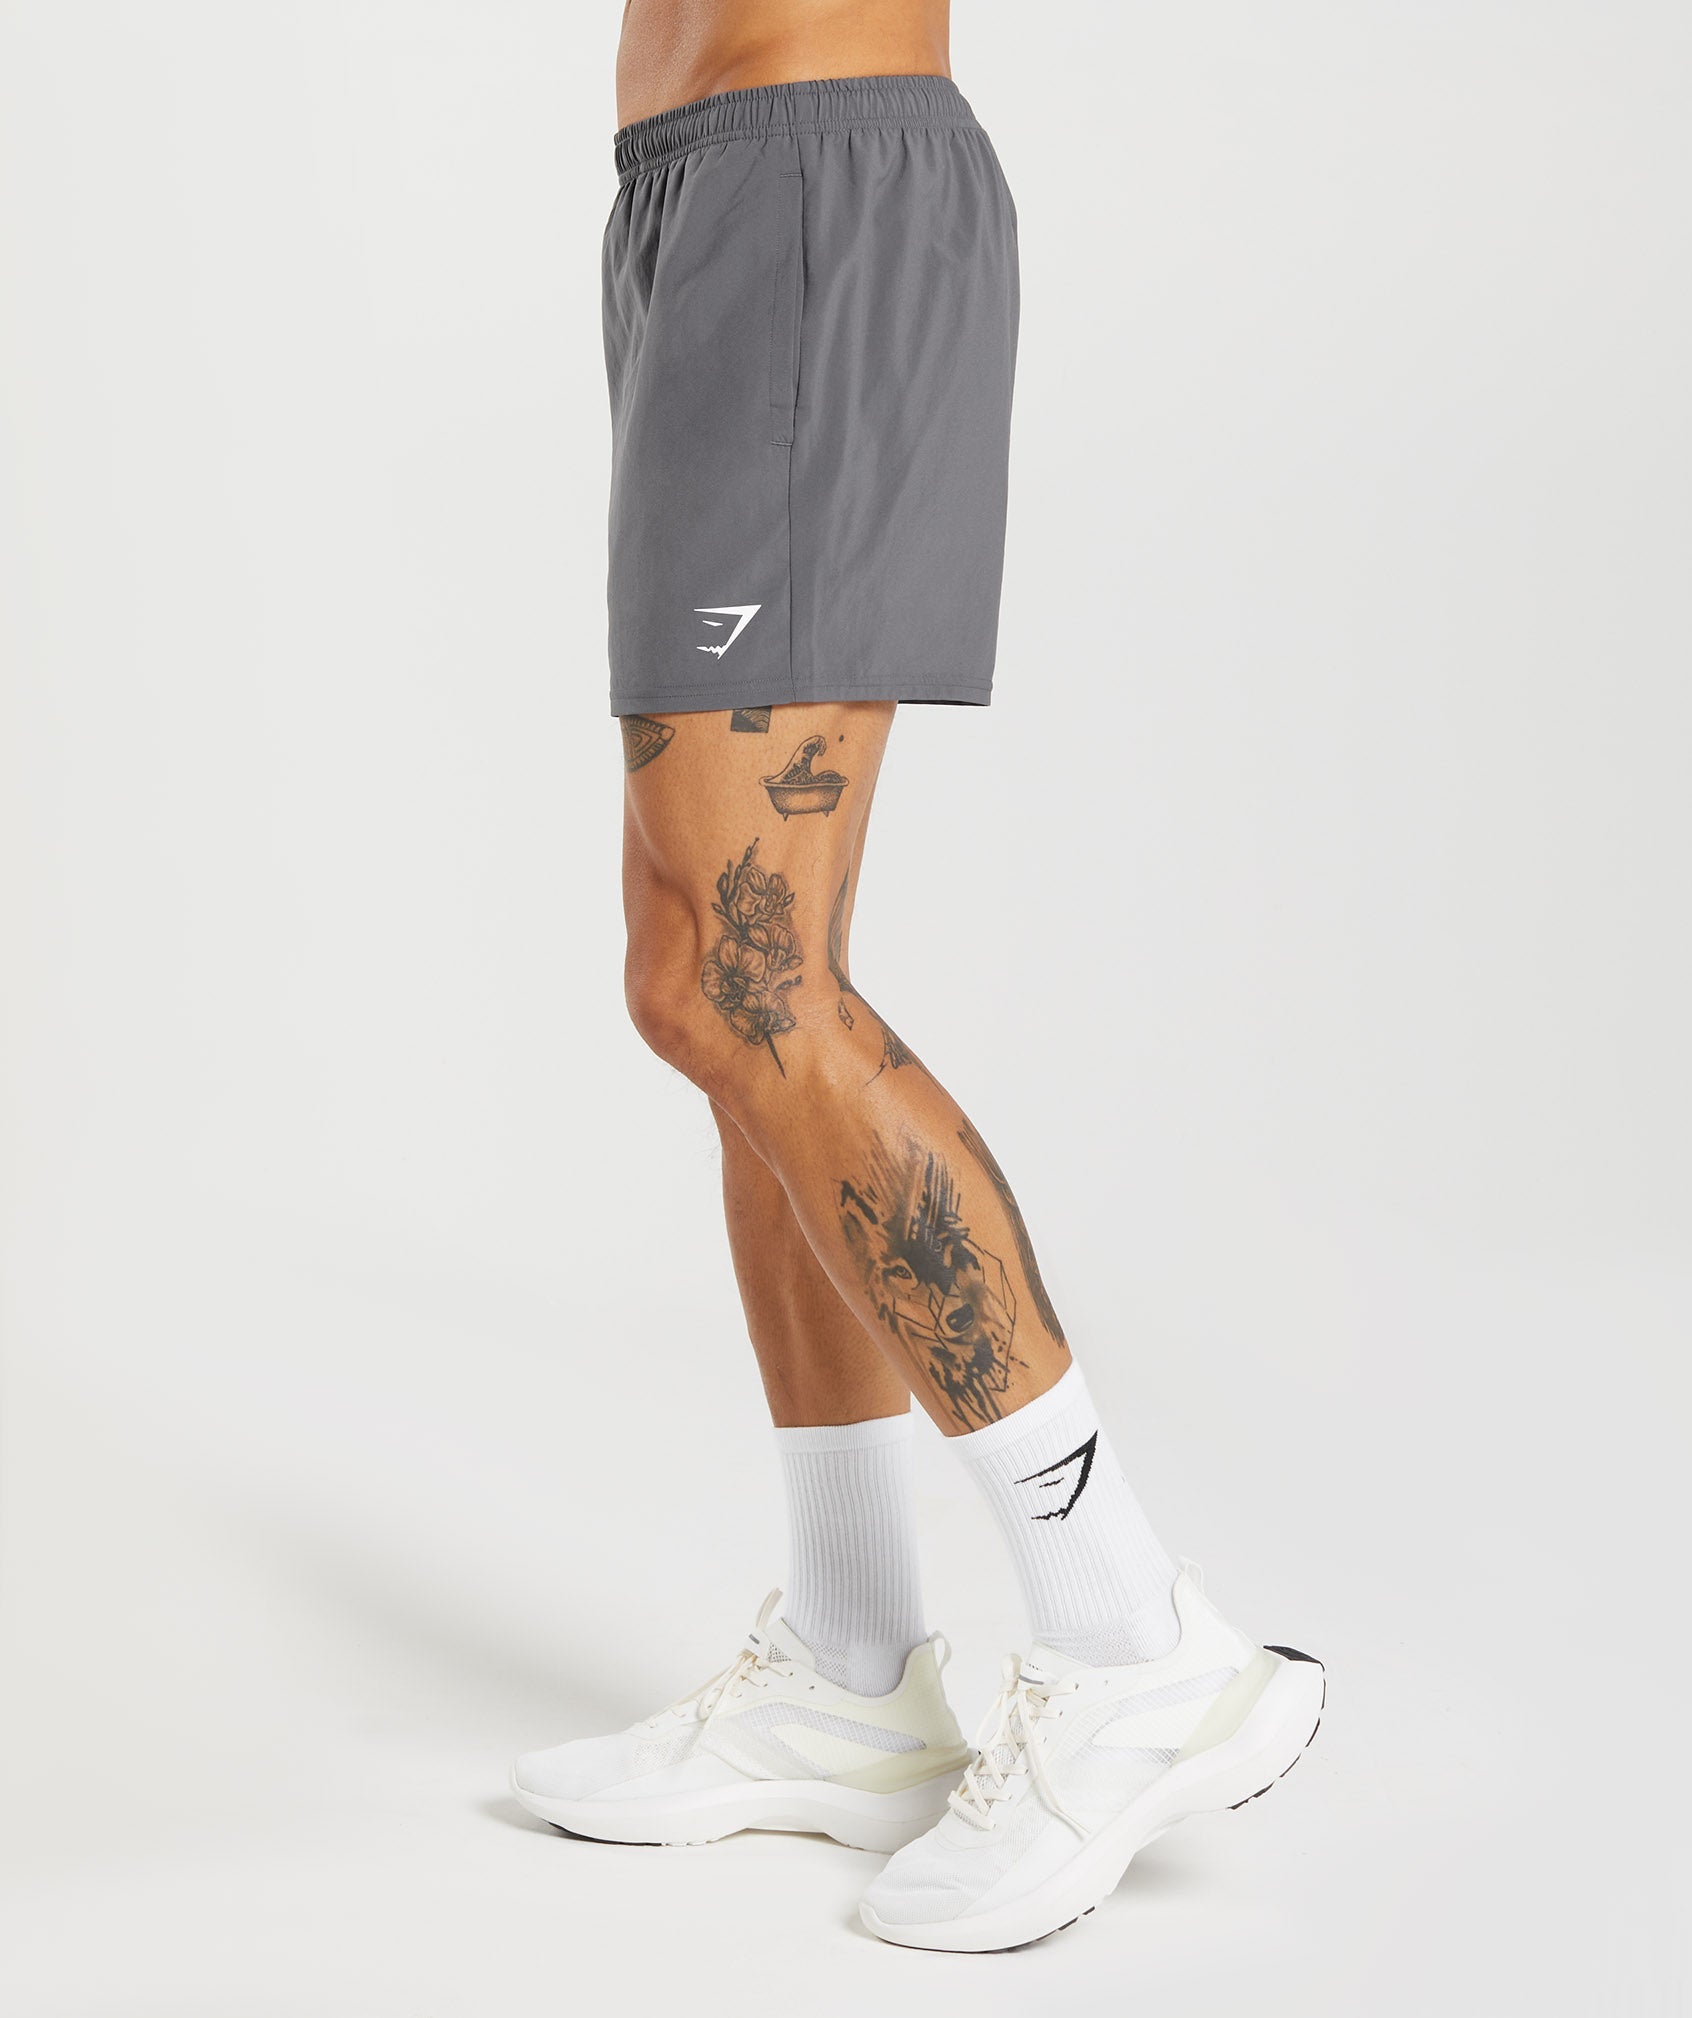 Arrival 5" Shorts in Silhouette Grey - view 3